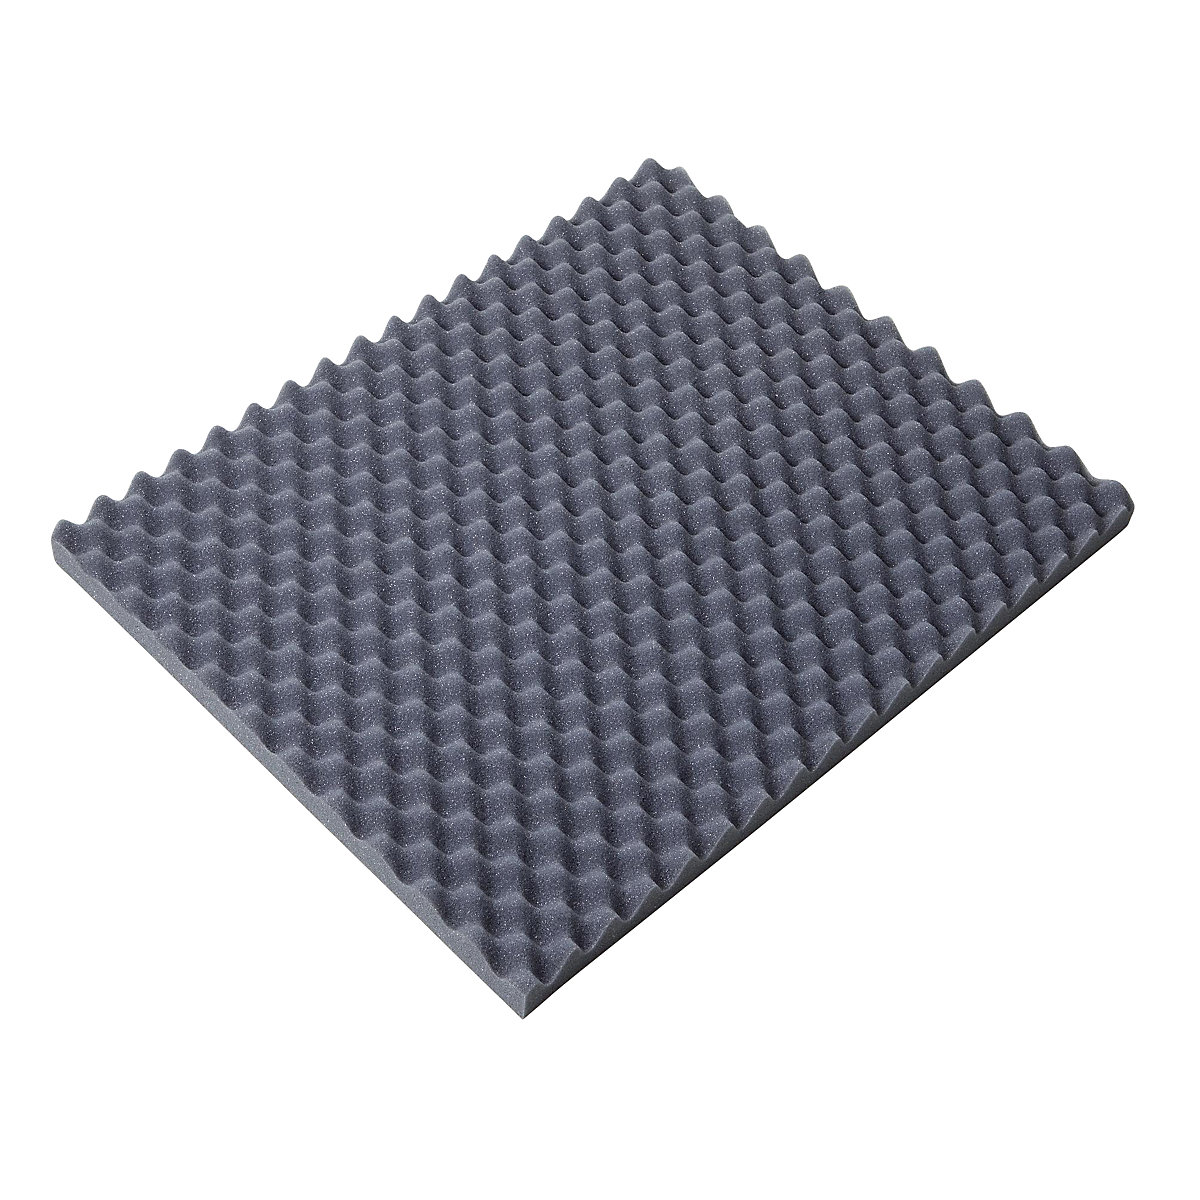 Egg crate foam sheet, 40 mm thick, LxW 600 x 400 mm, pack of 26, 3+ packs-1